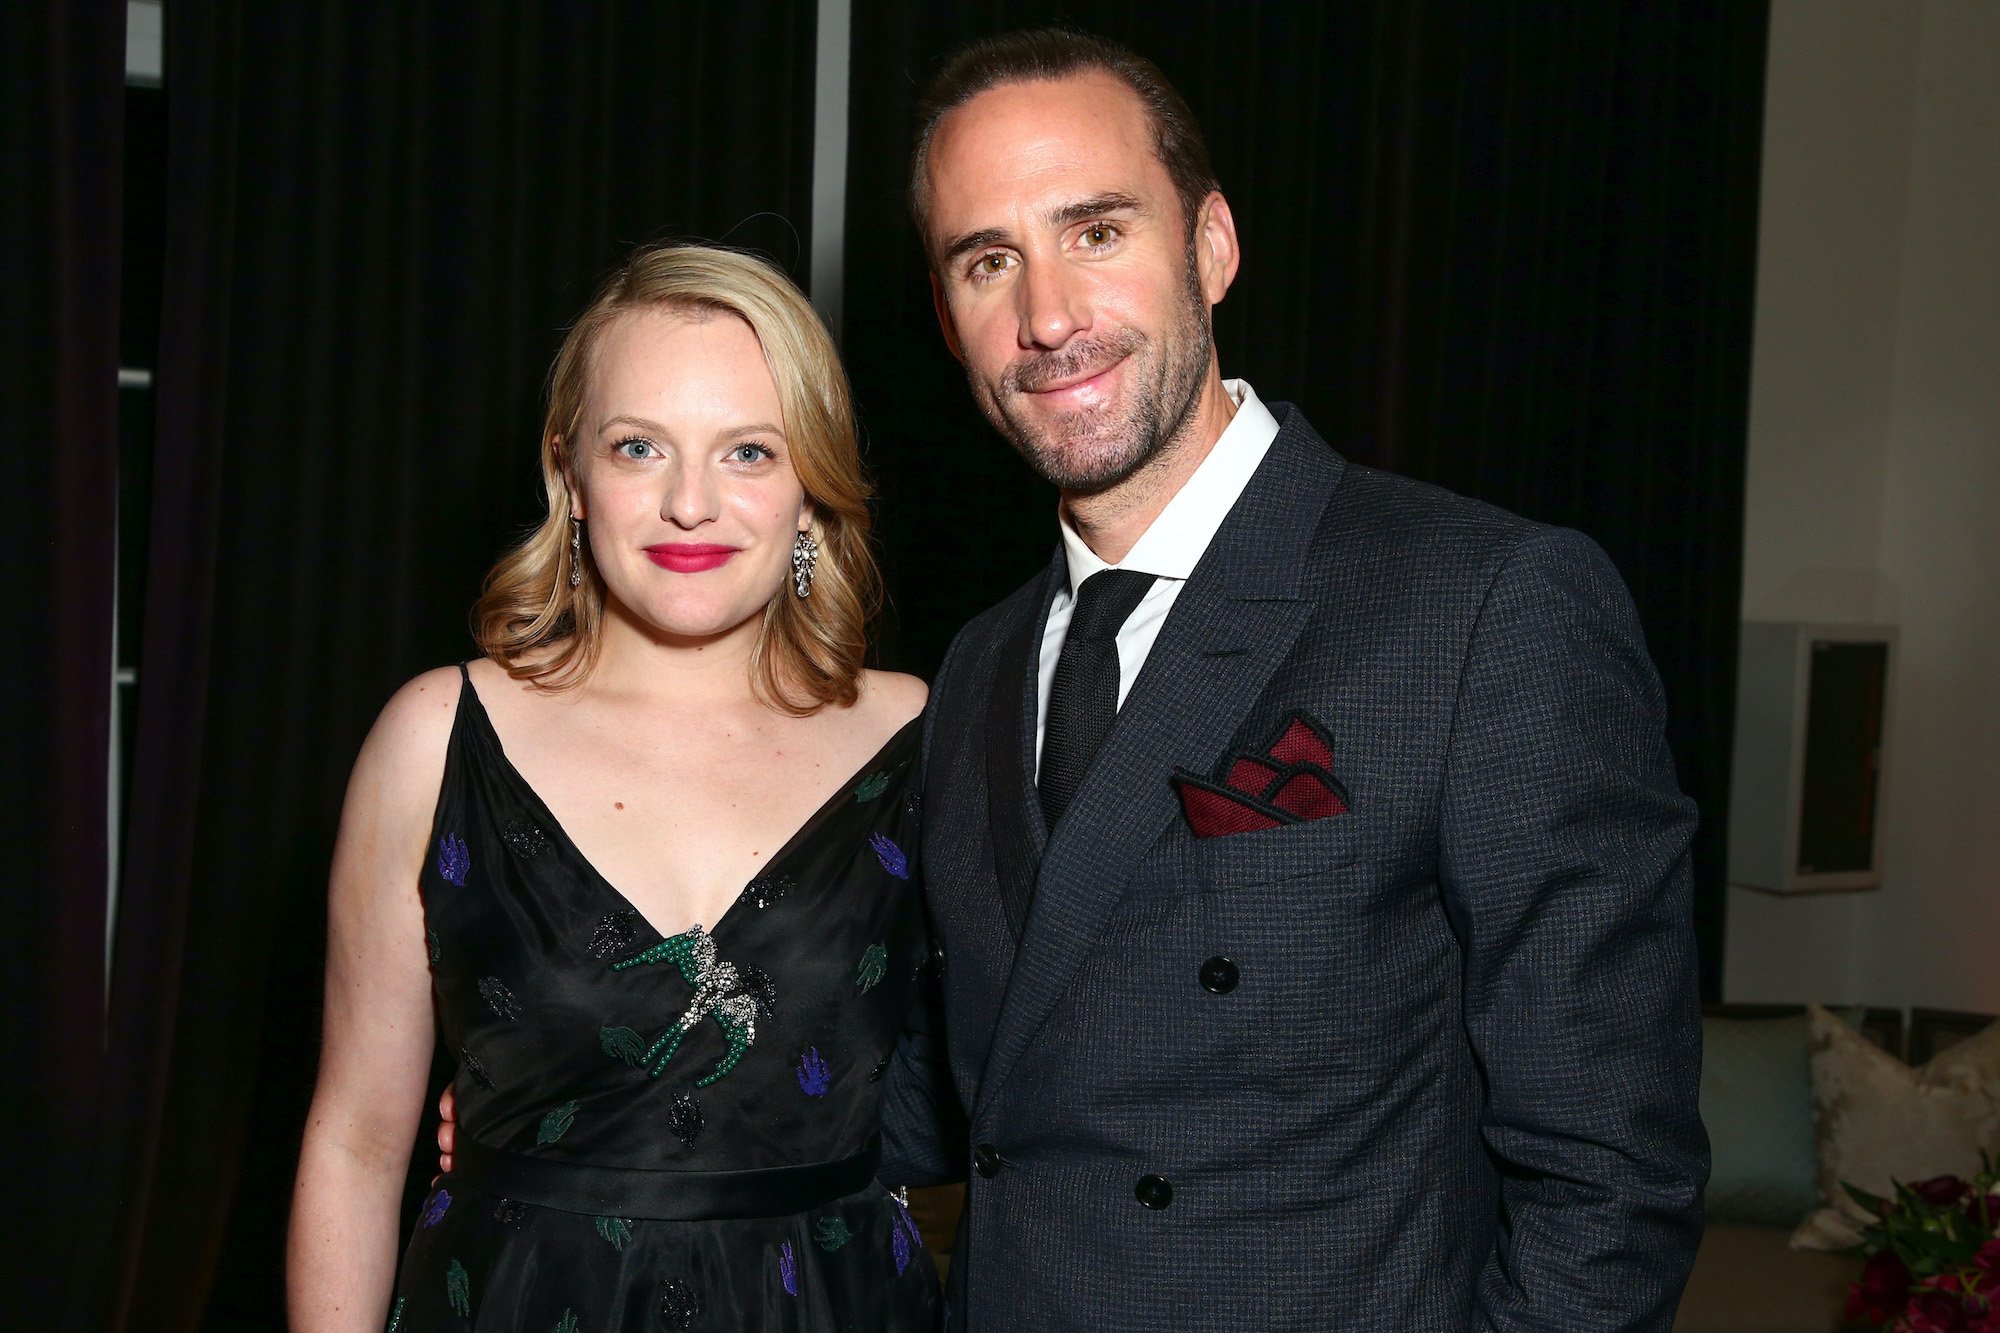 Are Rumors About Elizabeth Moss Pregnant?